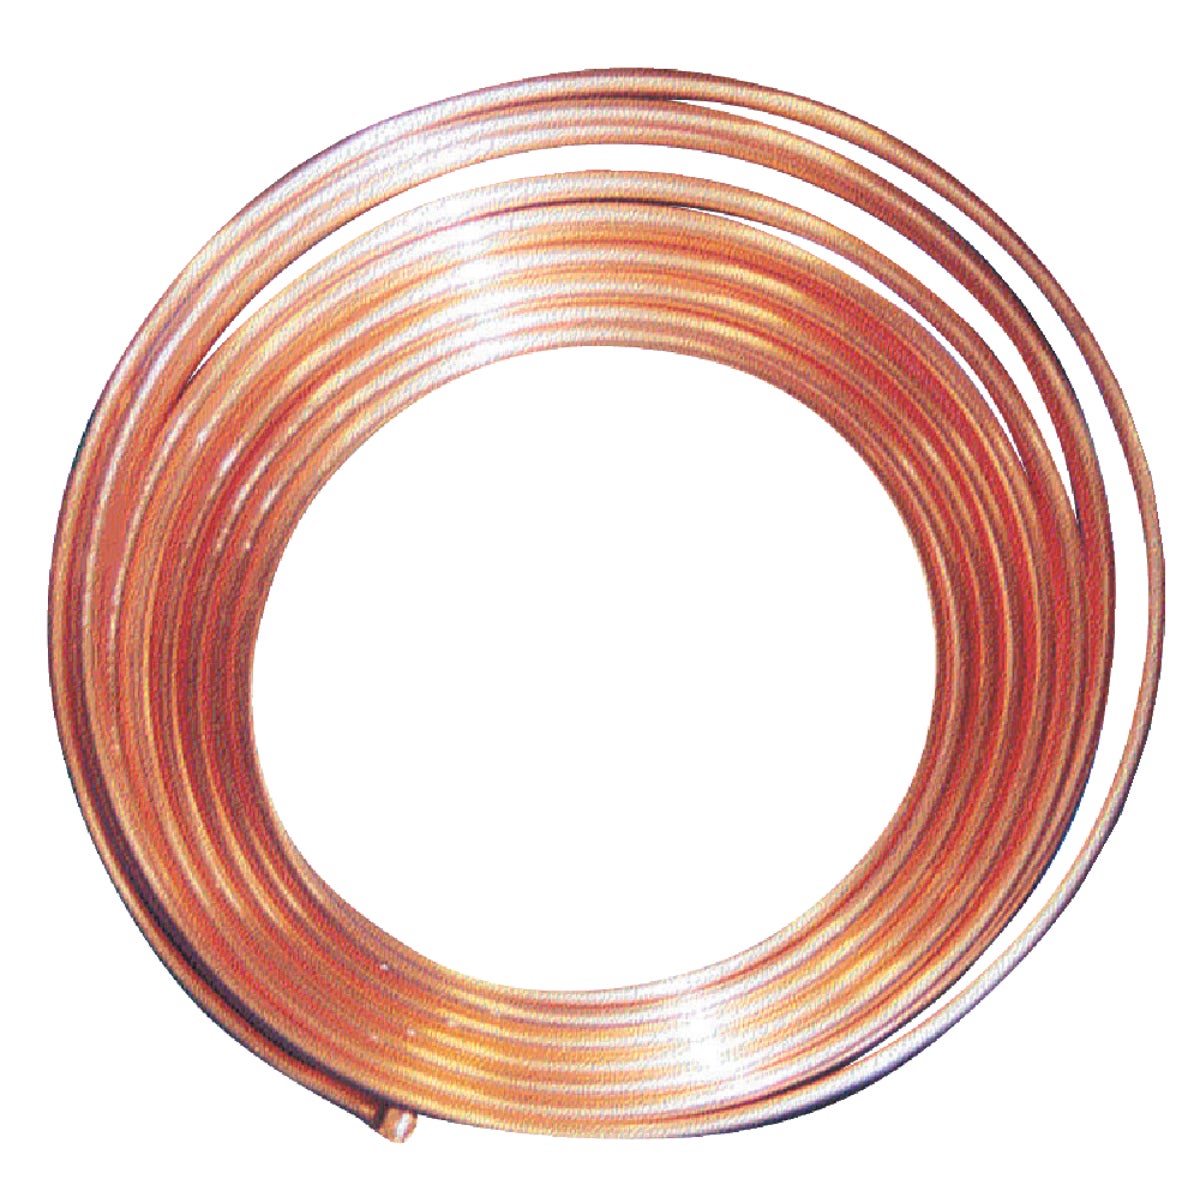 Item 446408, 99% pure copper. Annealed for ready bending. O.D.